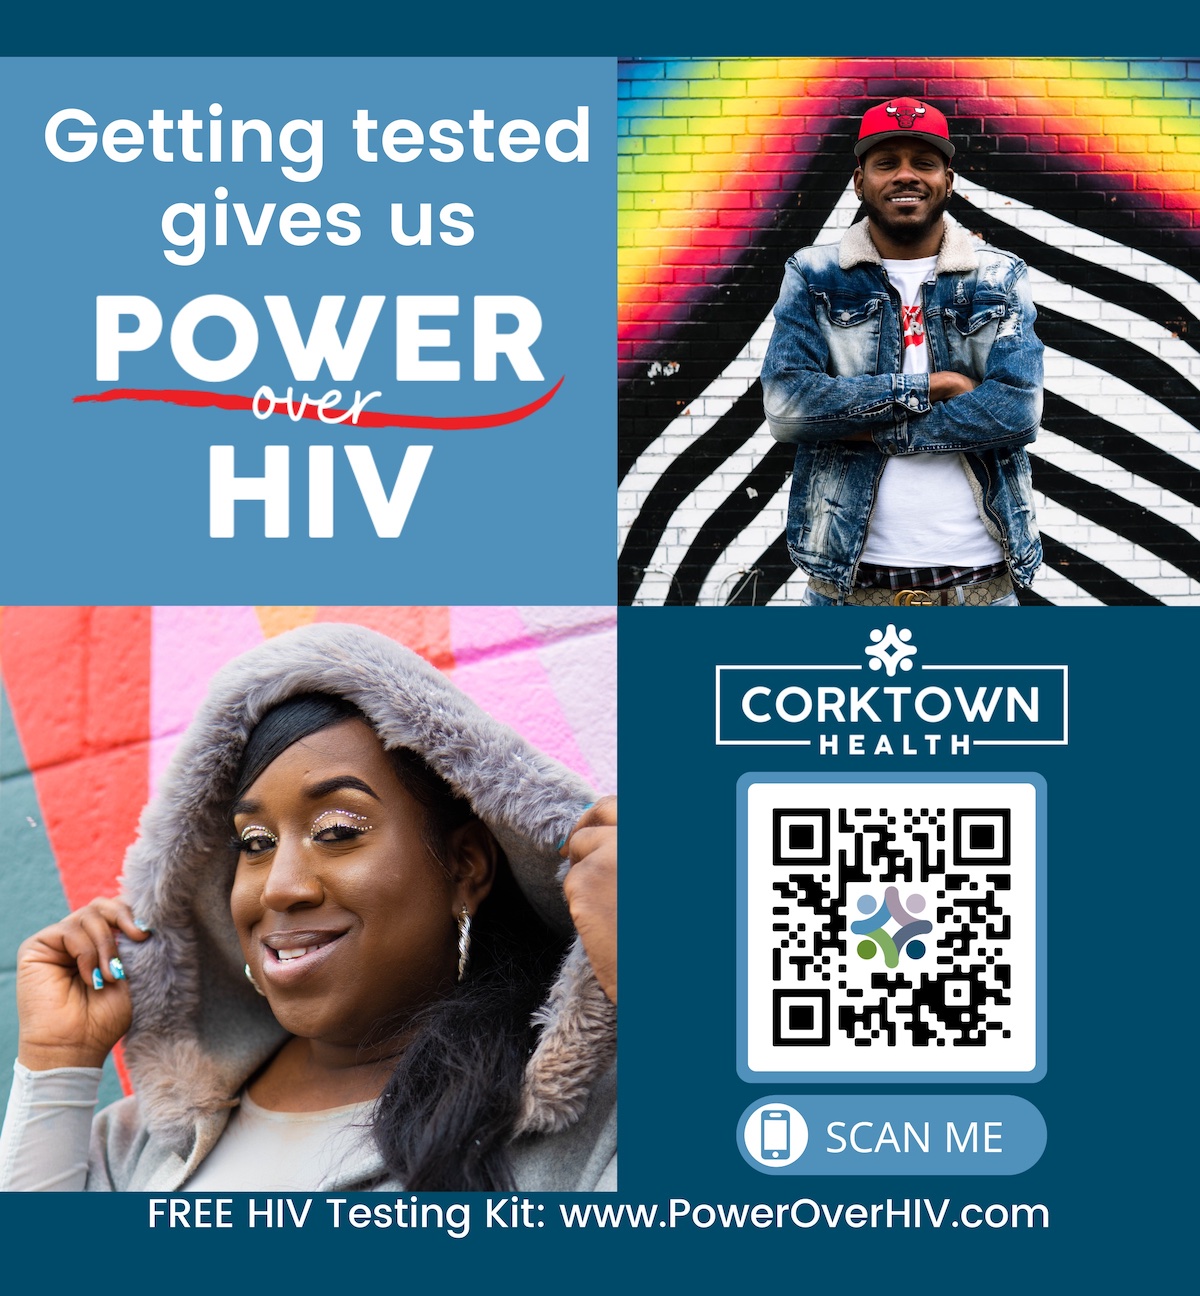 Get tested gives us power over HIV